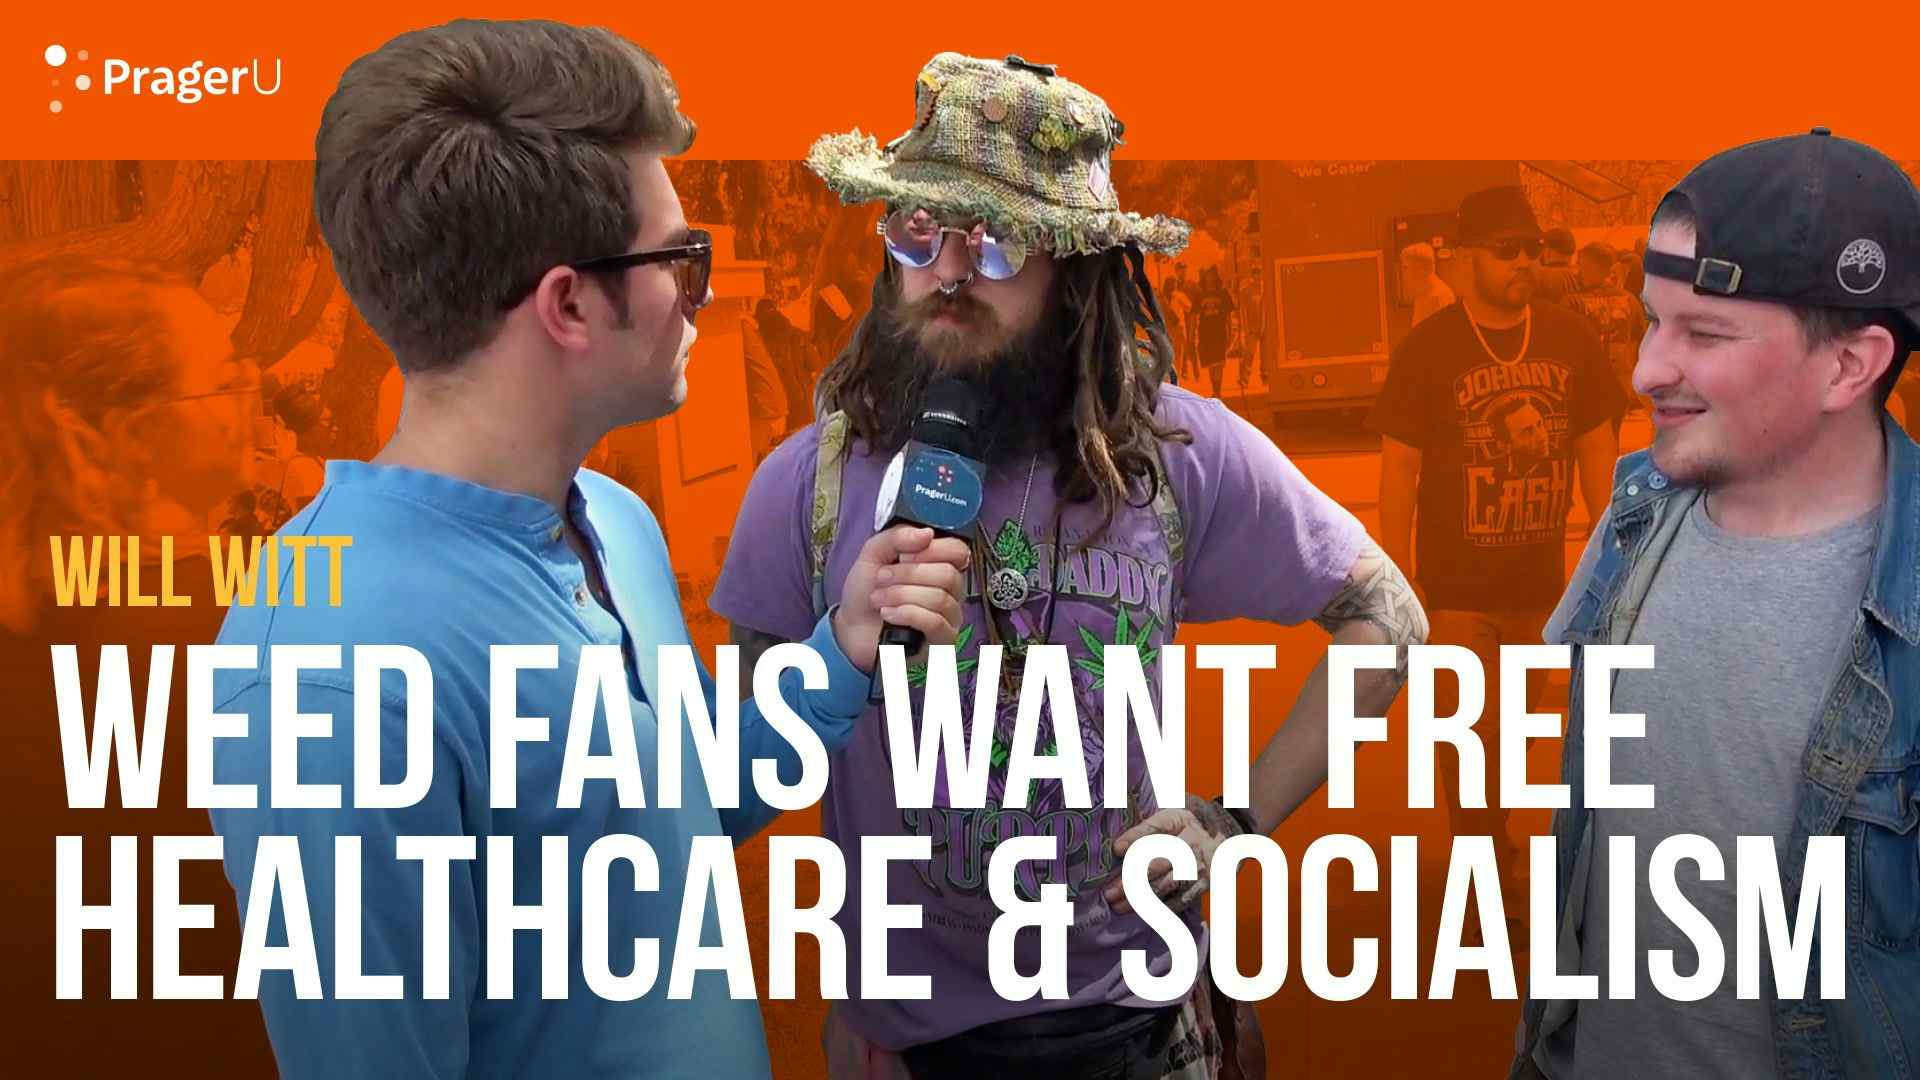 Weed Fans Want Free Healthcare and Socialism